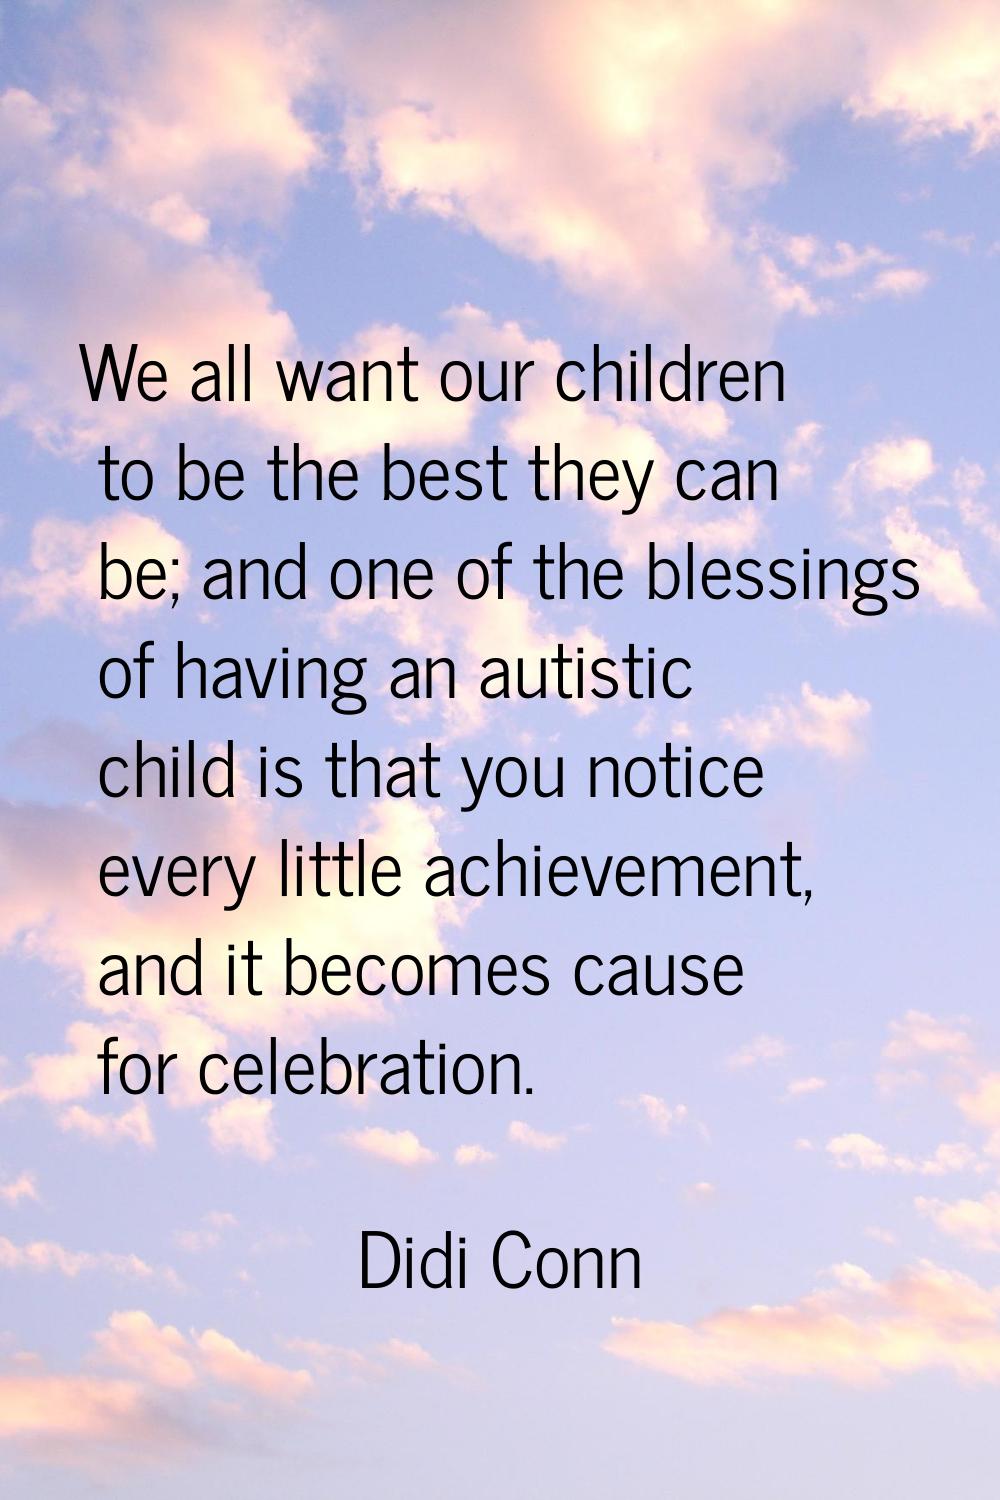 We all want our children to be the best they can be; and one of the blessings of having an autistic